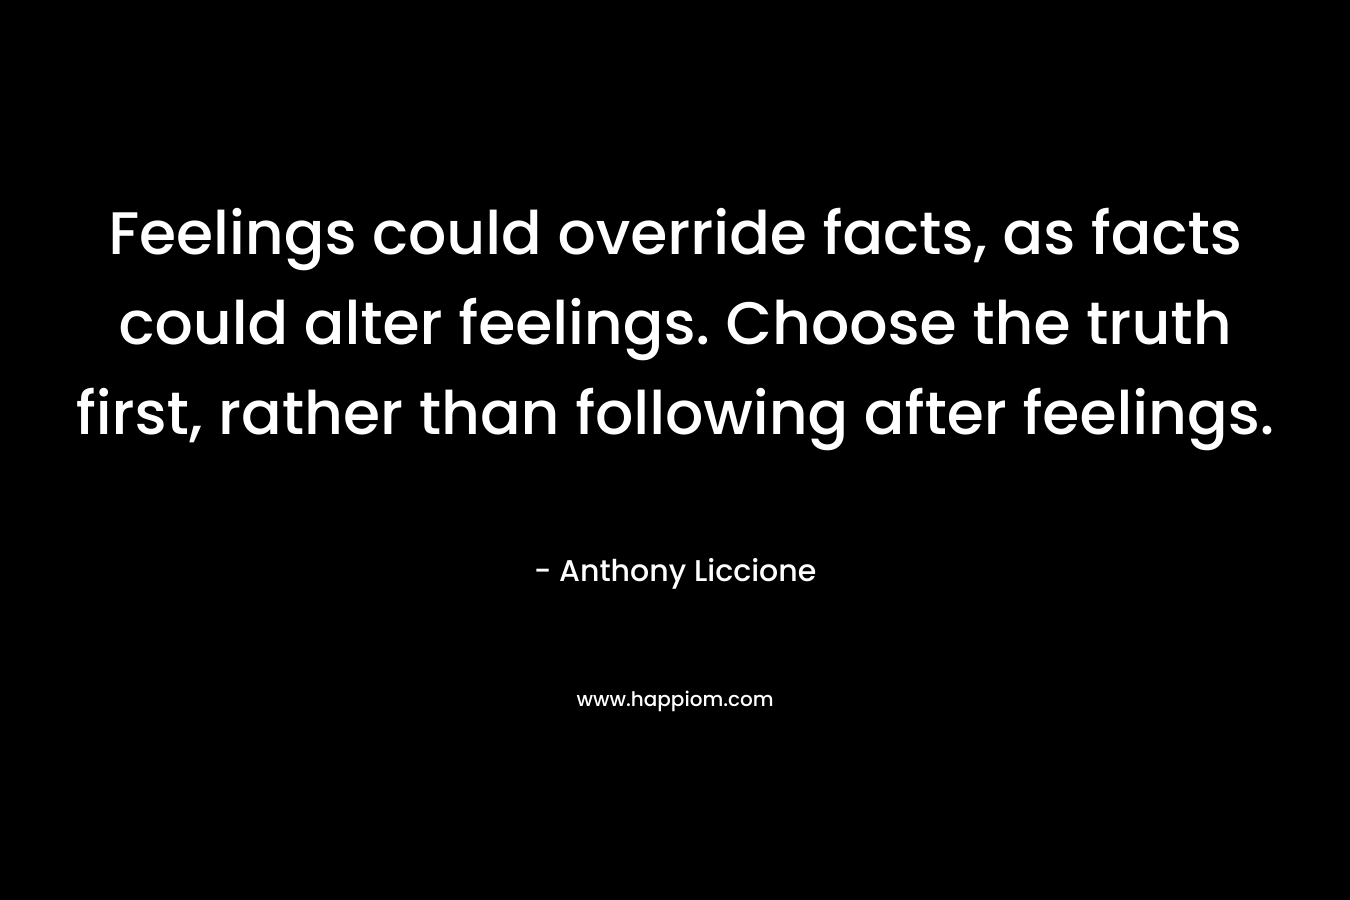 Feelings could override facts, as facts could alter feelings. Choose the truth first, rather than following after feelings.